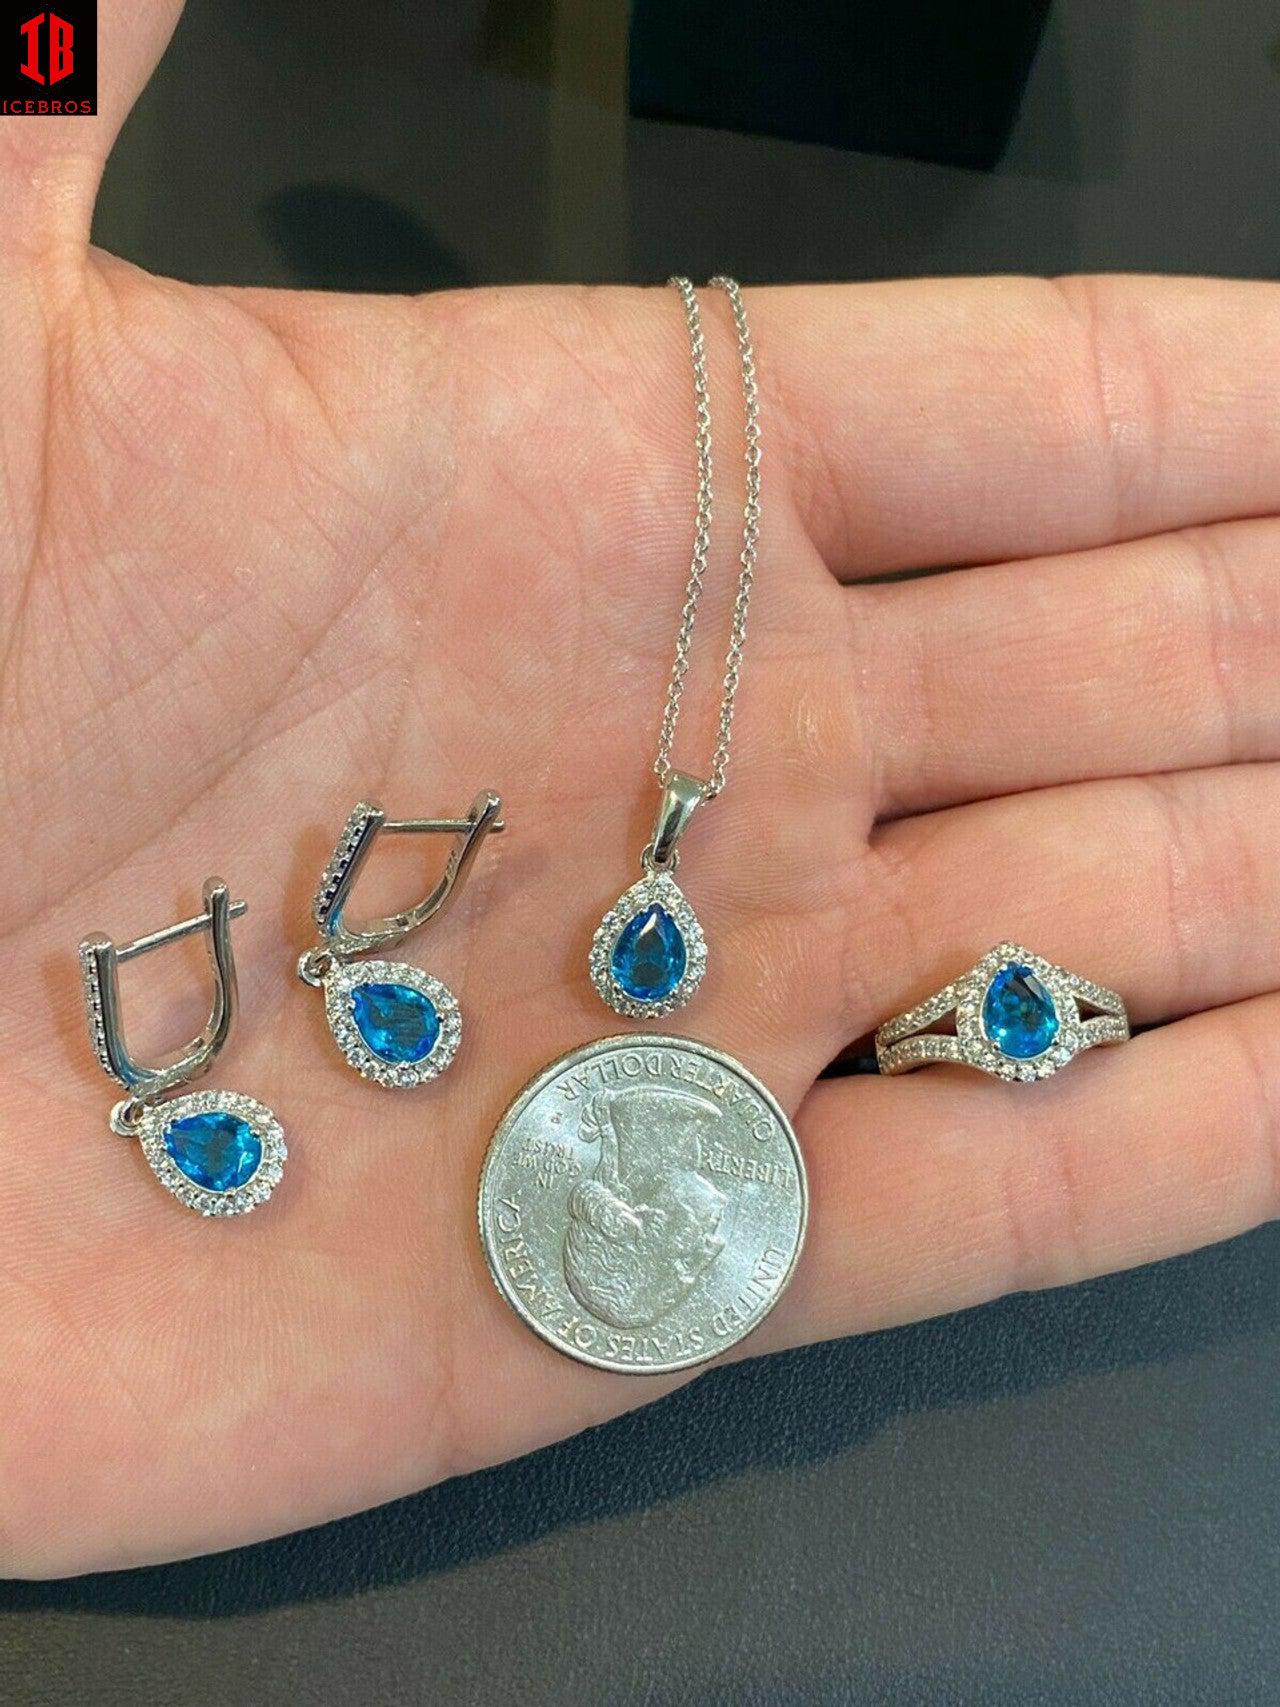 Real 925 Silver Blue Aquamarine Diamond Ring Necklace Earrings Girls Jewelry Set